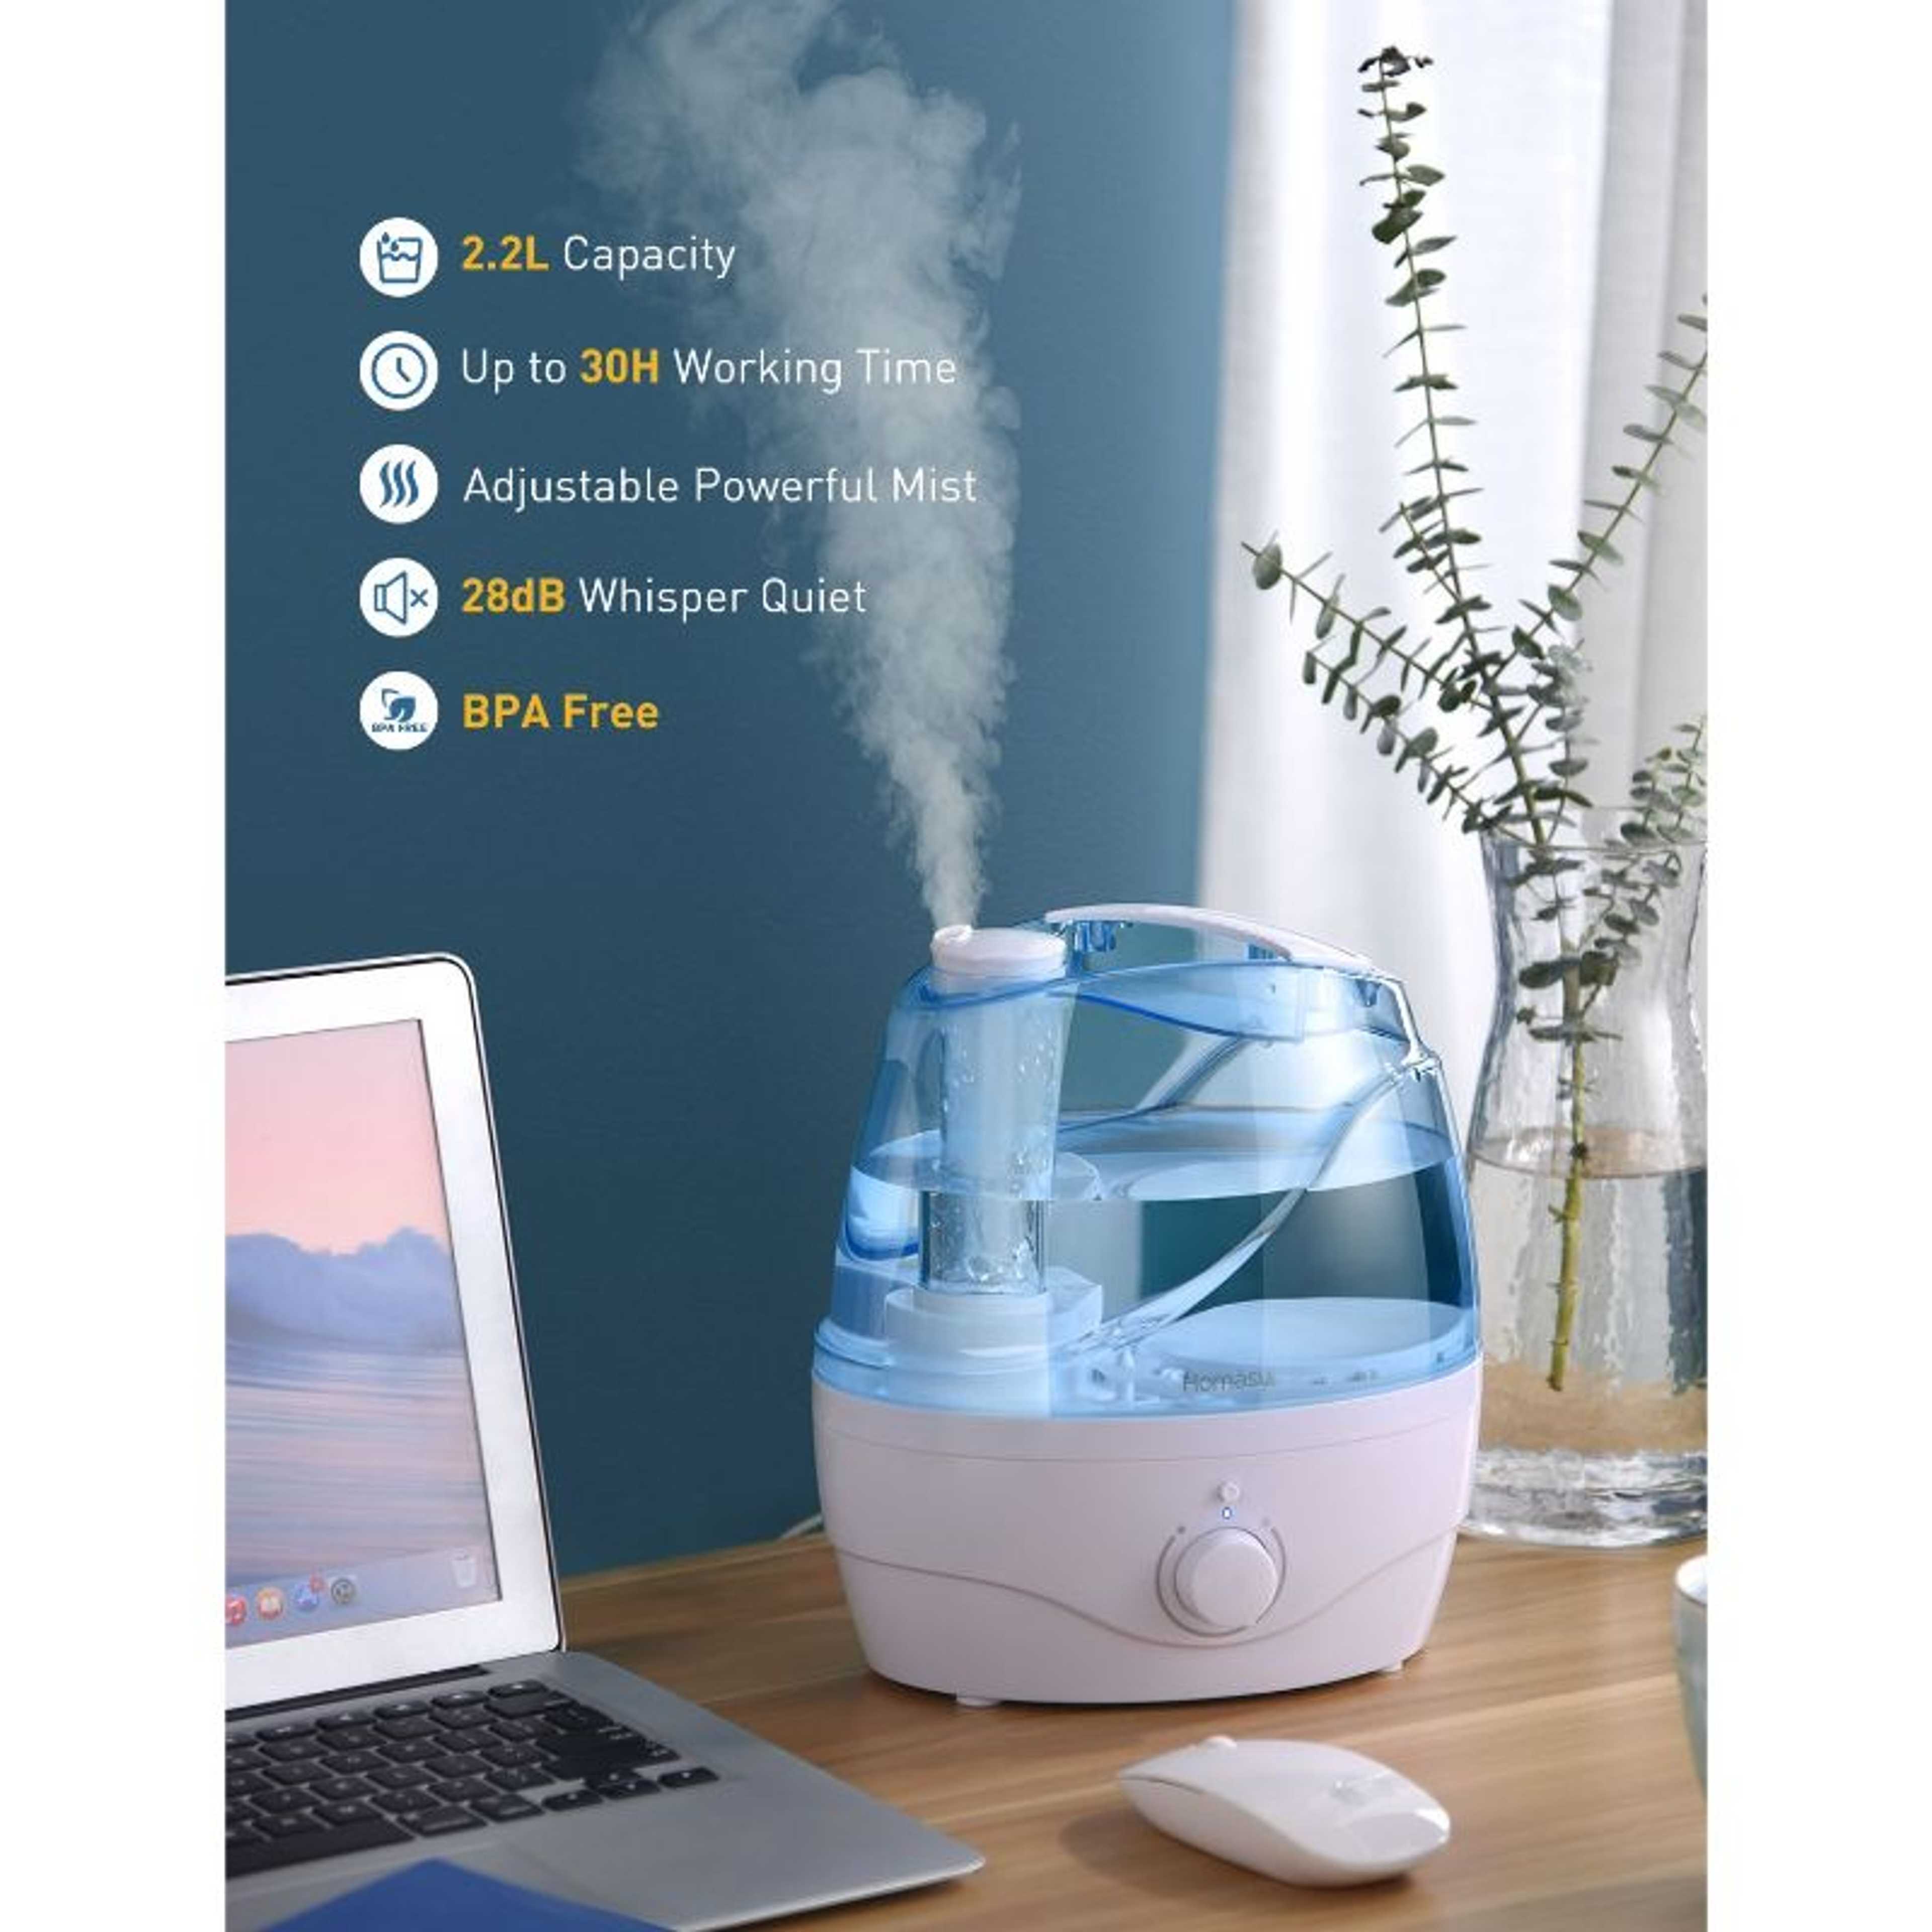 Homasy HM589 Cool Mist Humidifier, up to 30 Hours Run Time (2.2 L/0.58 Gallon)Homasy HM589 Cool Mist Humidifier, up to 30 Hours Run Time (2.2 L/0.58 Gallon)Homasy HM589 Cool Mist Humidifier, up to 30 Hours Run Time (2.2 L/0.58 Gallon)Homasy HM589 Cool Mi